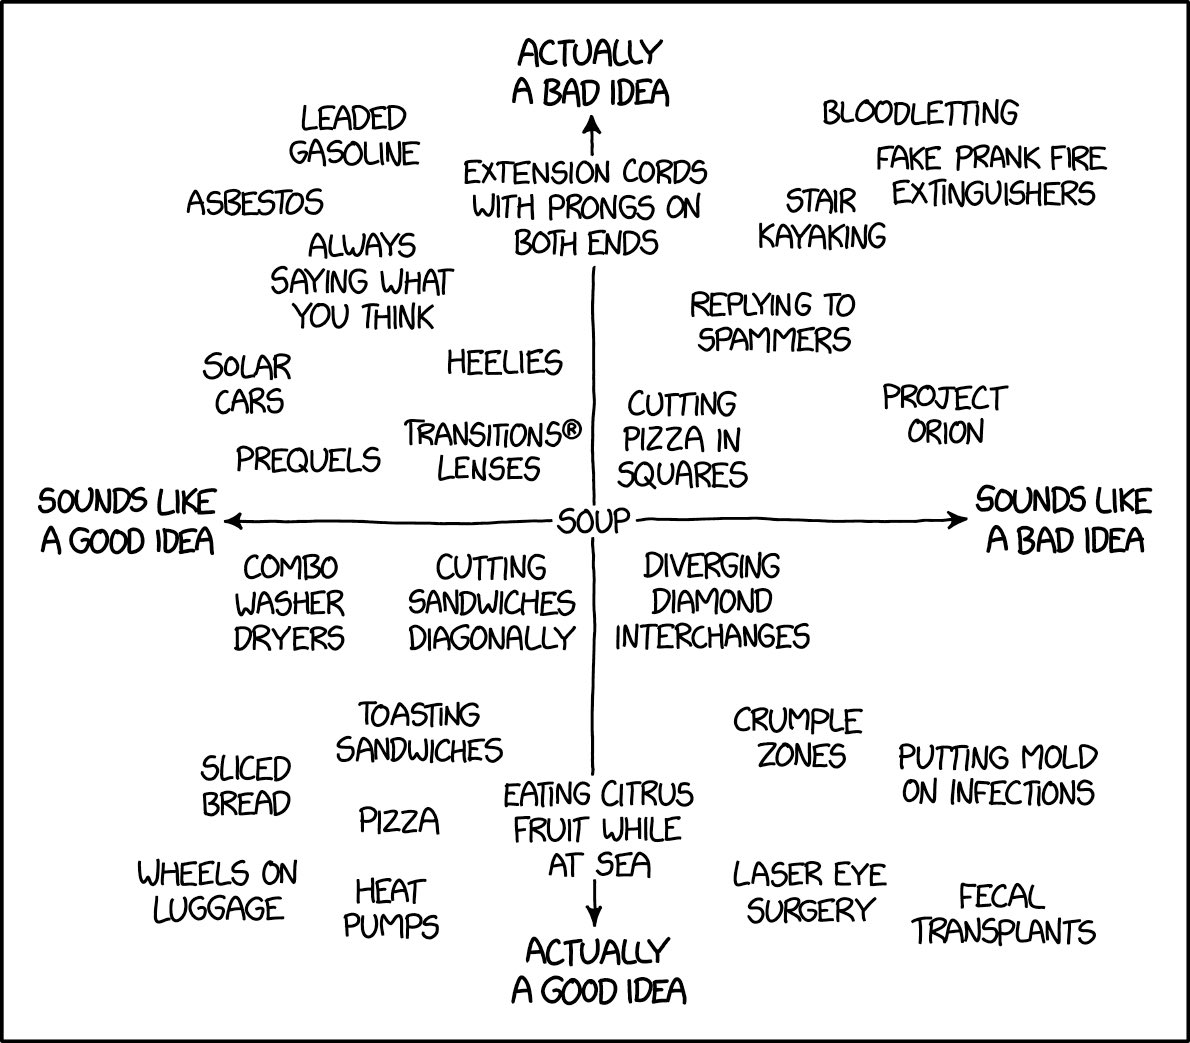 Good and Bad Ideas xkcd.com/2929